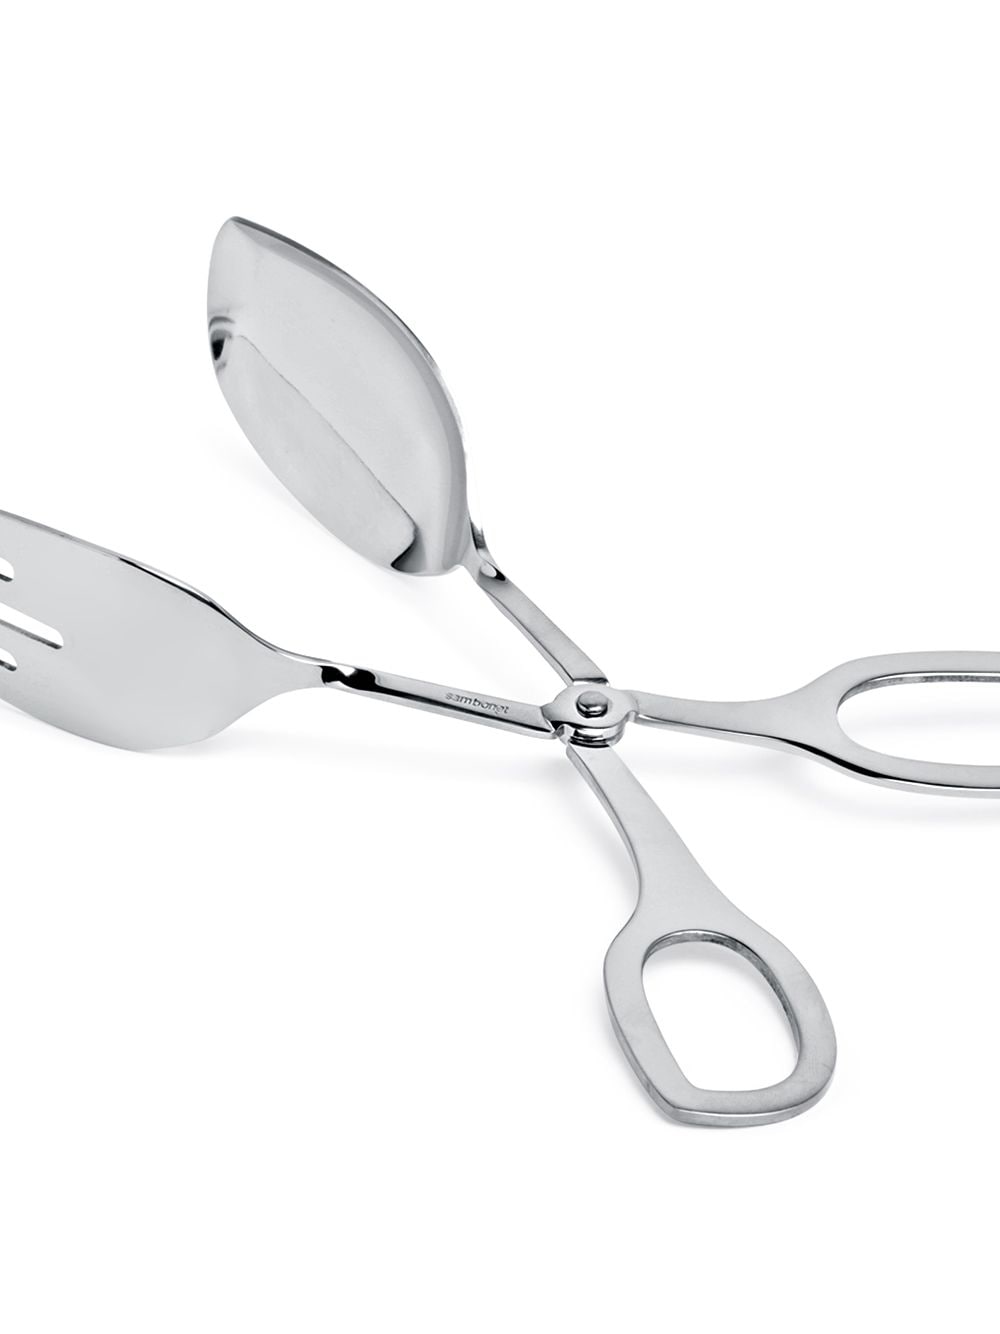 Image 2 of Sambonet Living collection serving pliers